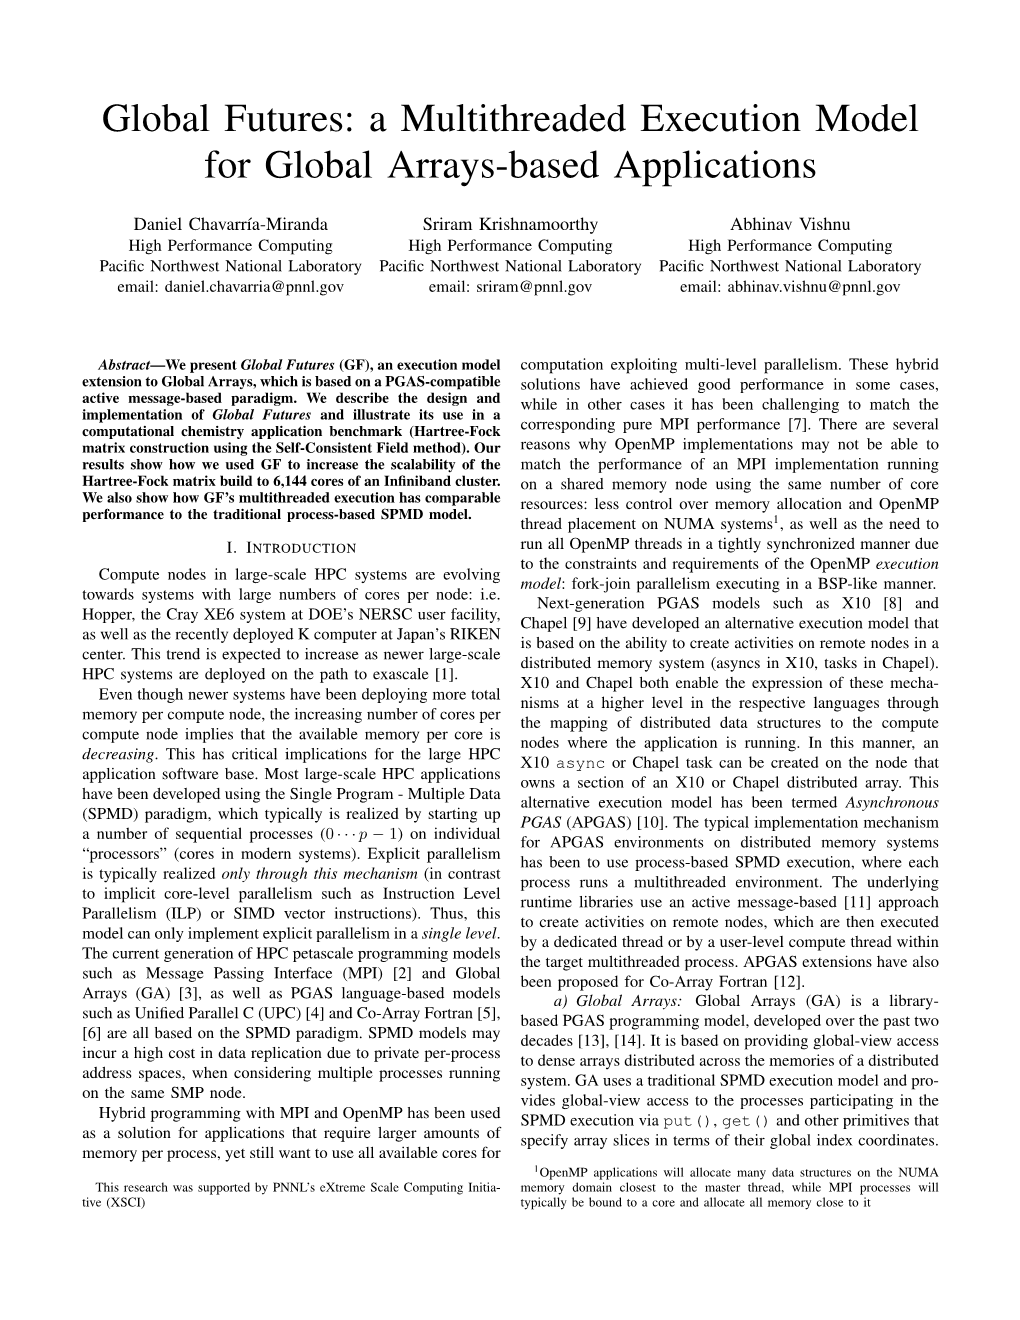 Global Futures: a Multithreaded Execution Model for Global Arrays-Based Applications